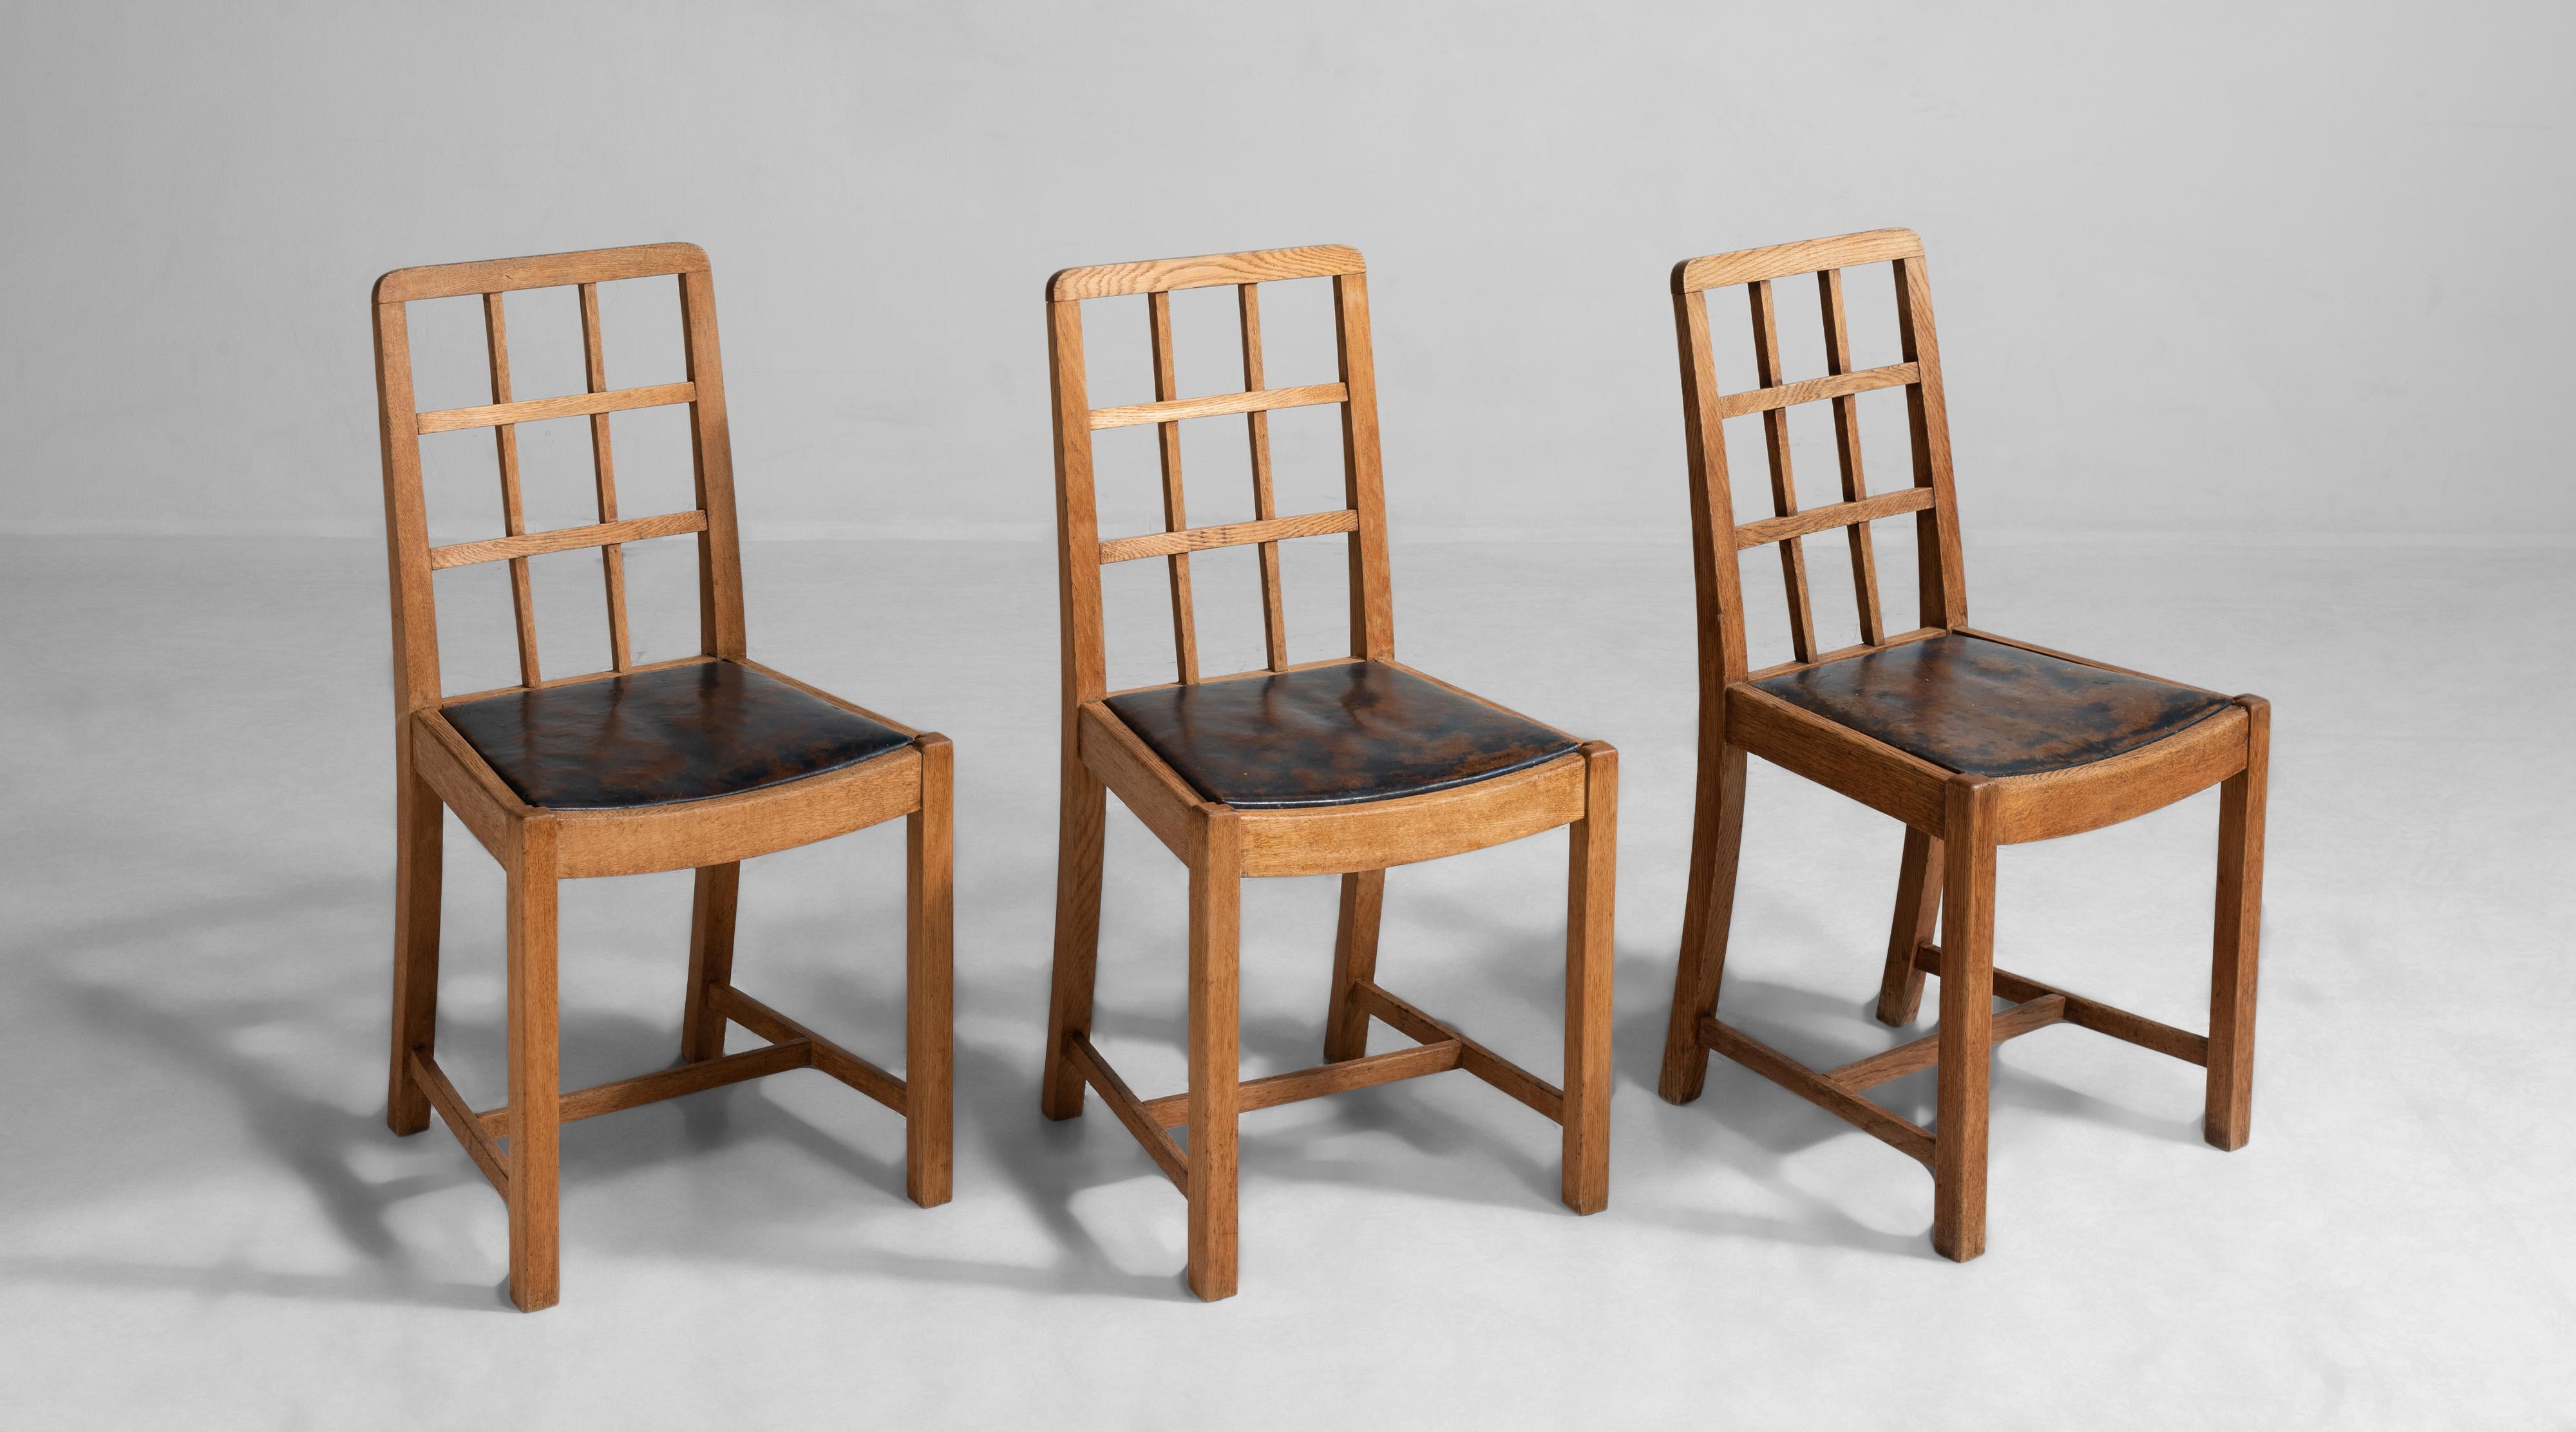 Pale oak lattice back dining chairs with original leather seats.


Measures: 17” W x 17.5” D x 33.75” H x 18” seat.
   